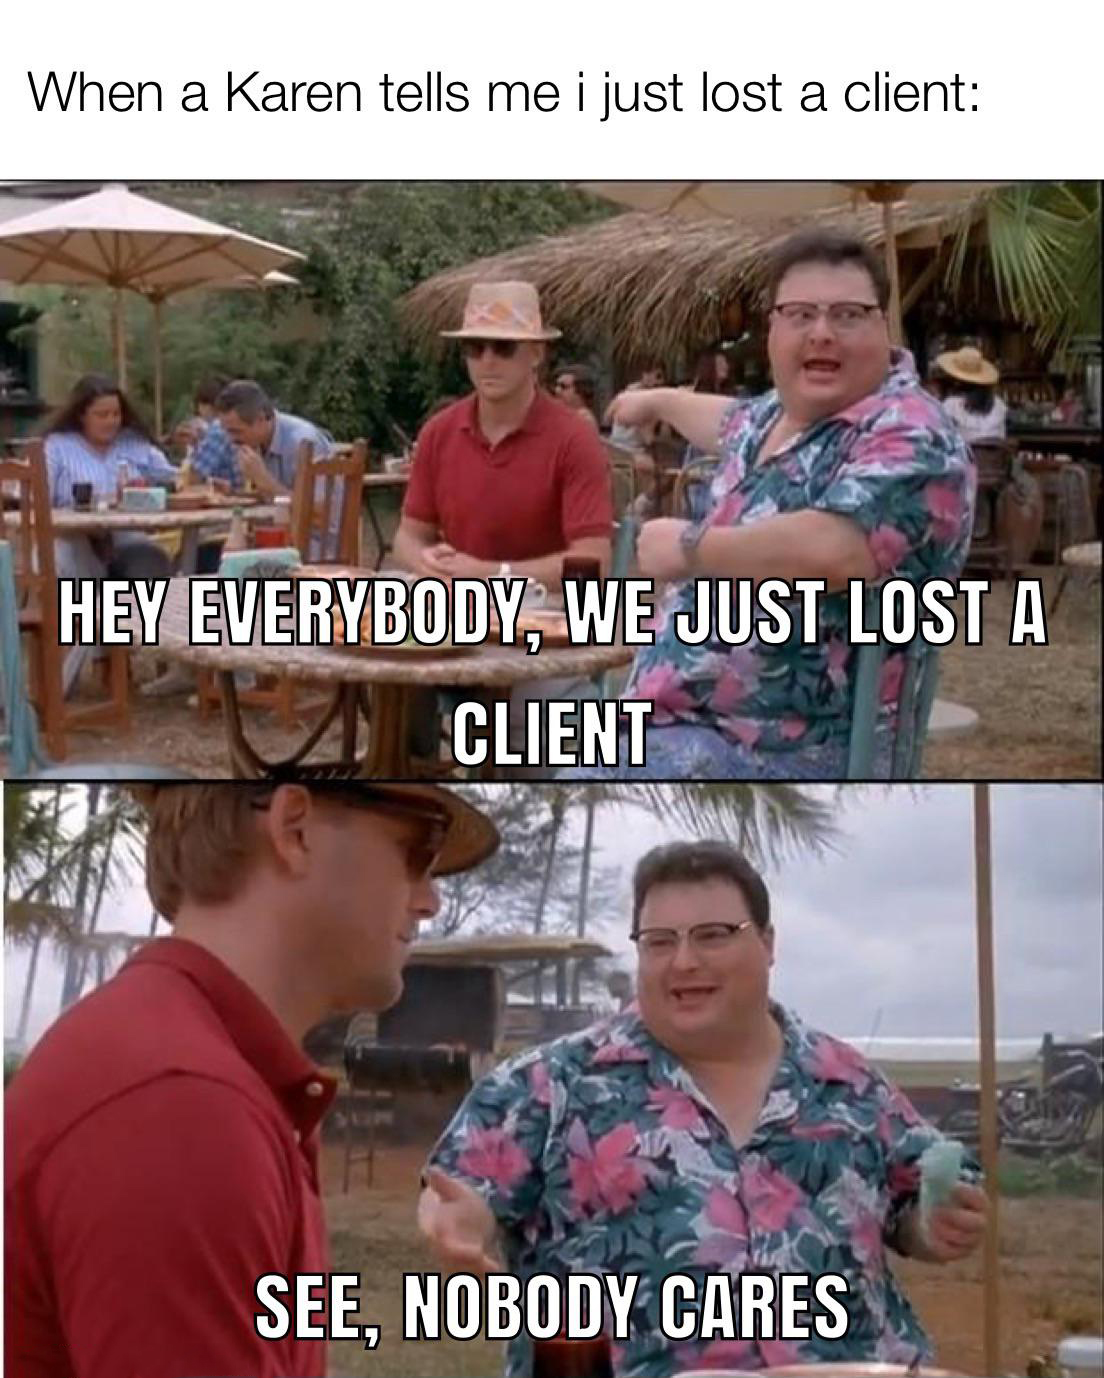 jurassic park meme - When a Karen tells me i just lost a client Hey Everybody, We Just Lost A Client See, Nobody Cares